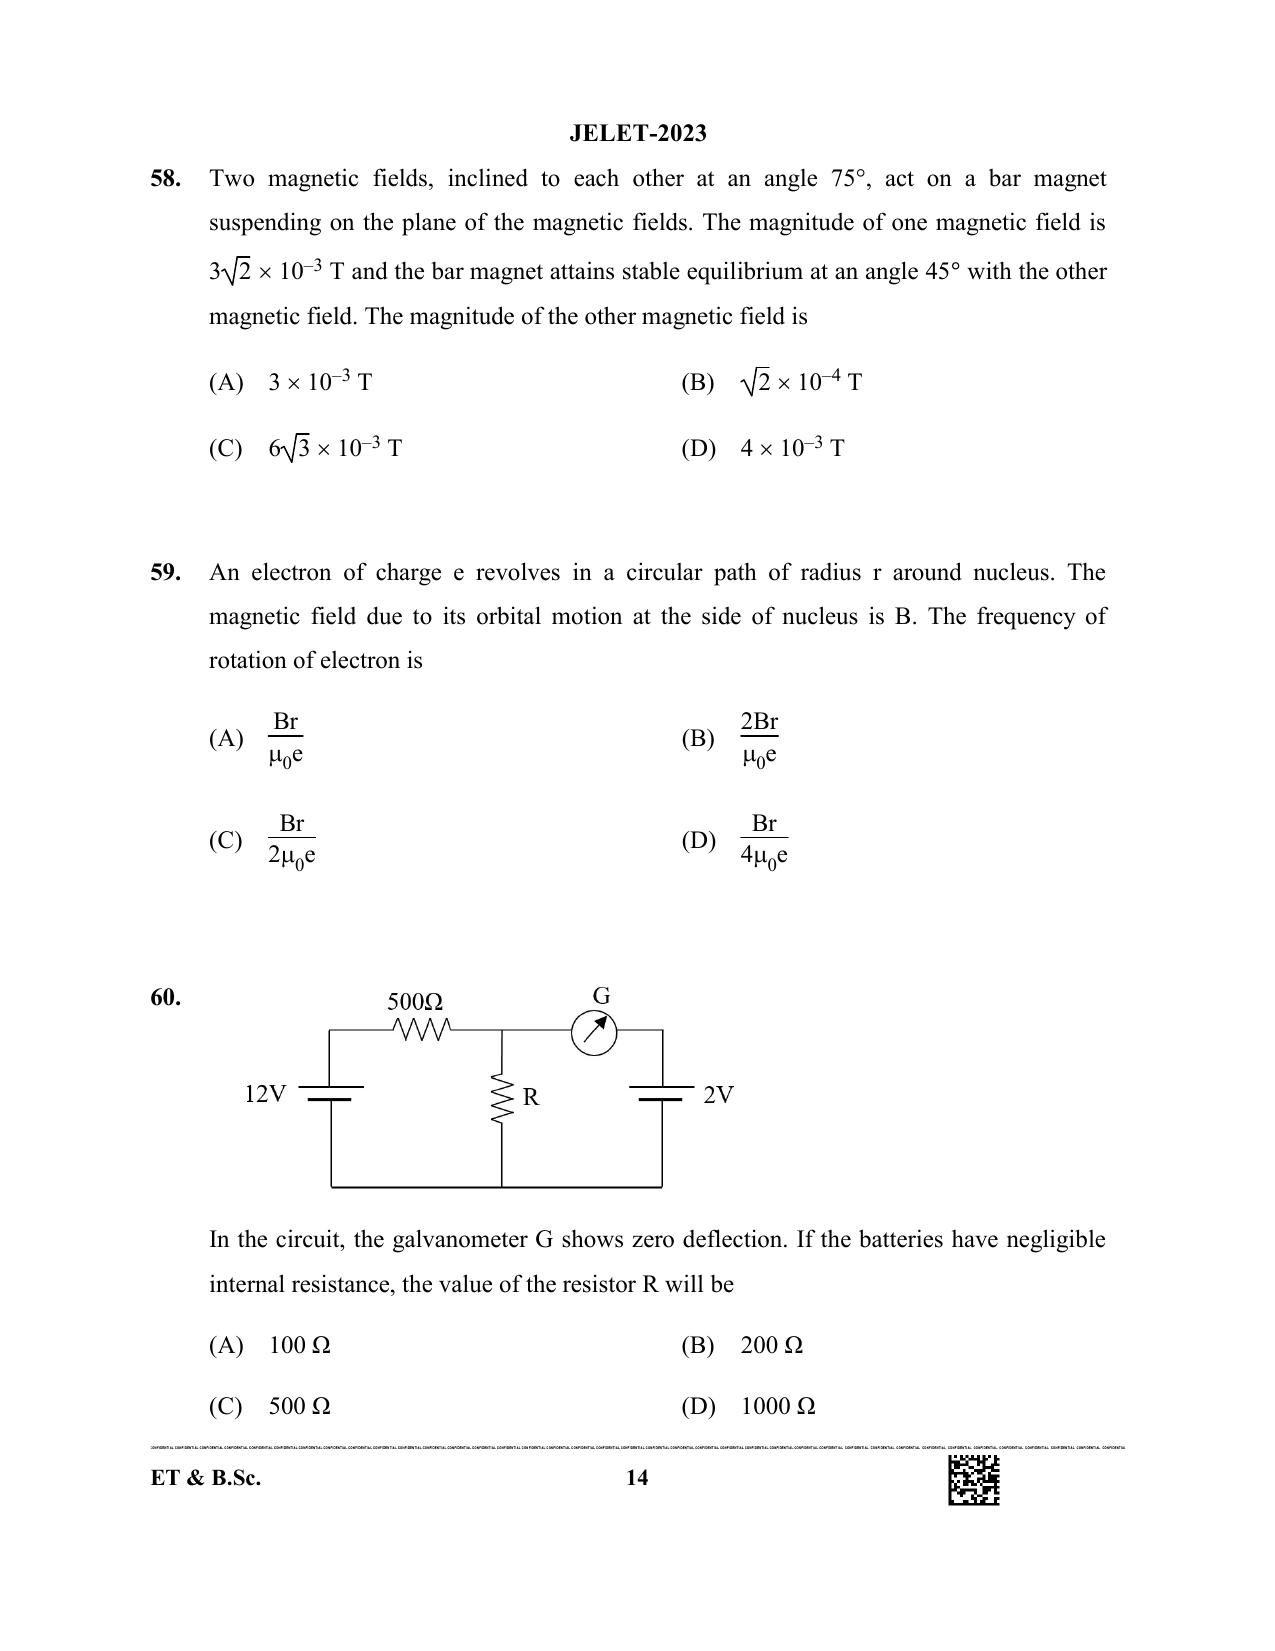 WBJEE JELET 2023 Paper I (ET & BSC) Question Papers - Page 14